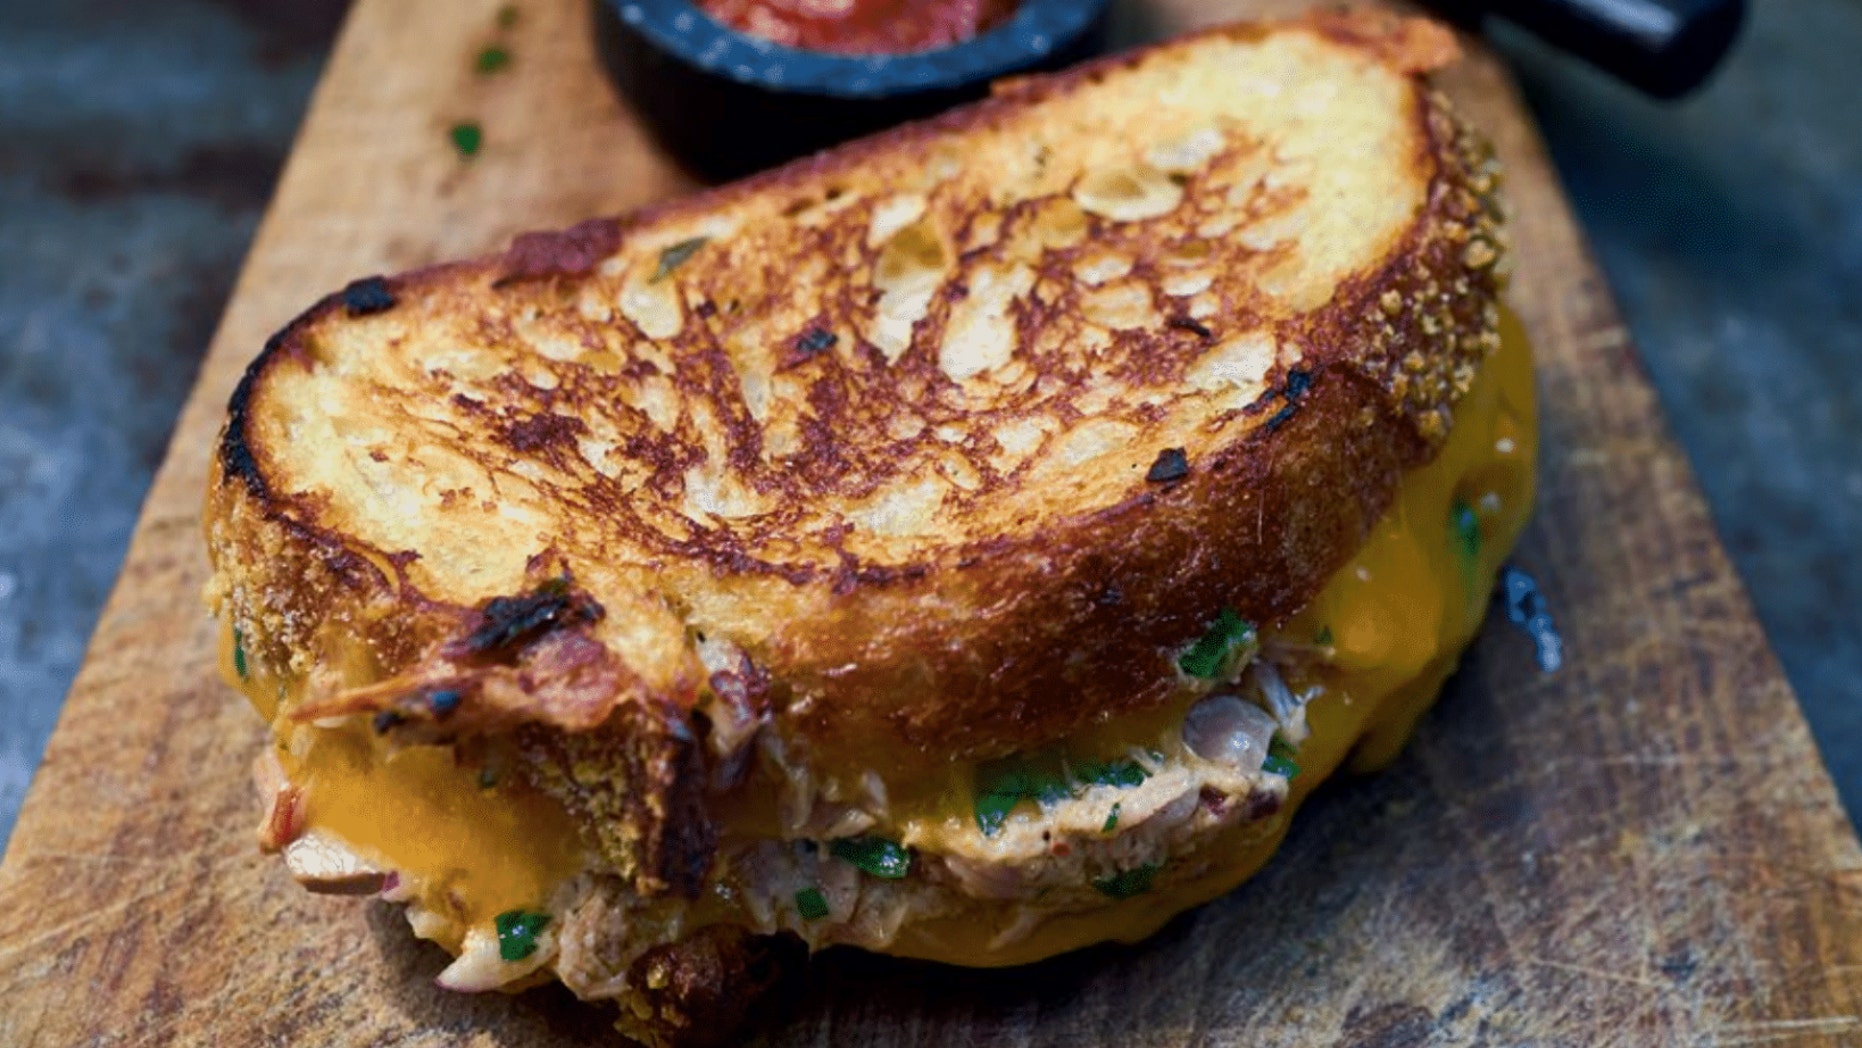 “This seemingly simple toasted sandwich with tuna and lots of cheese is a real American classic,” writes Bart Van Olphen in his 